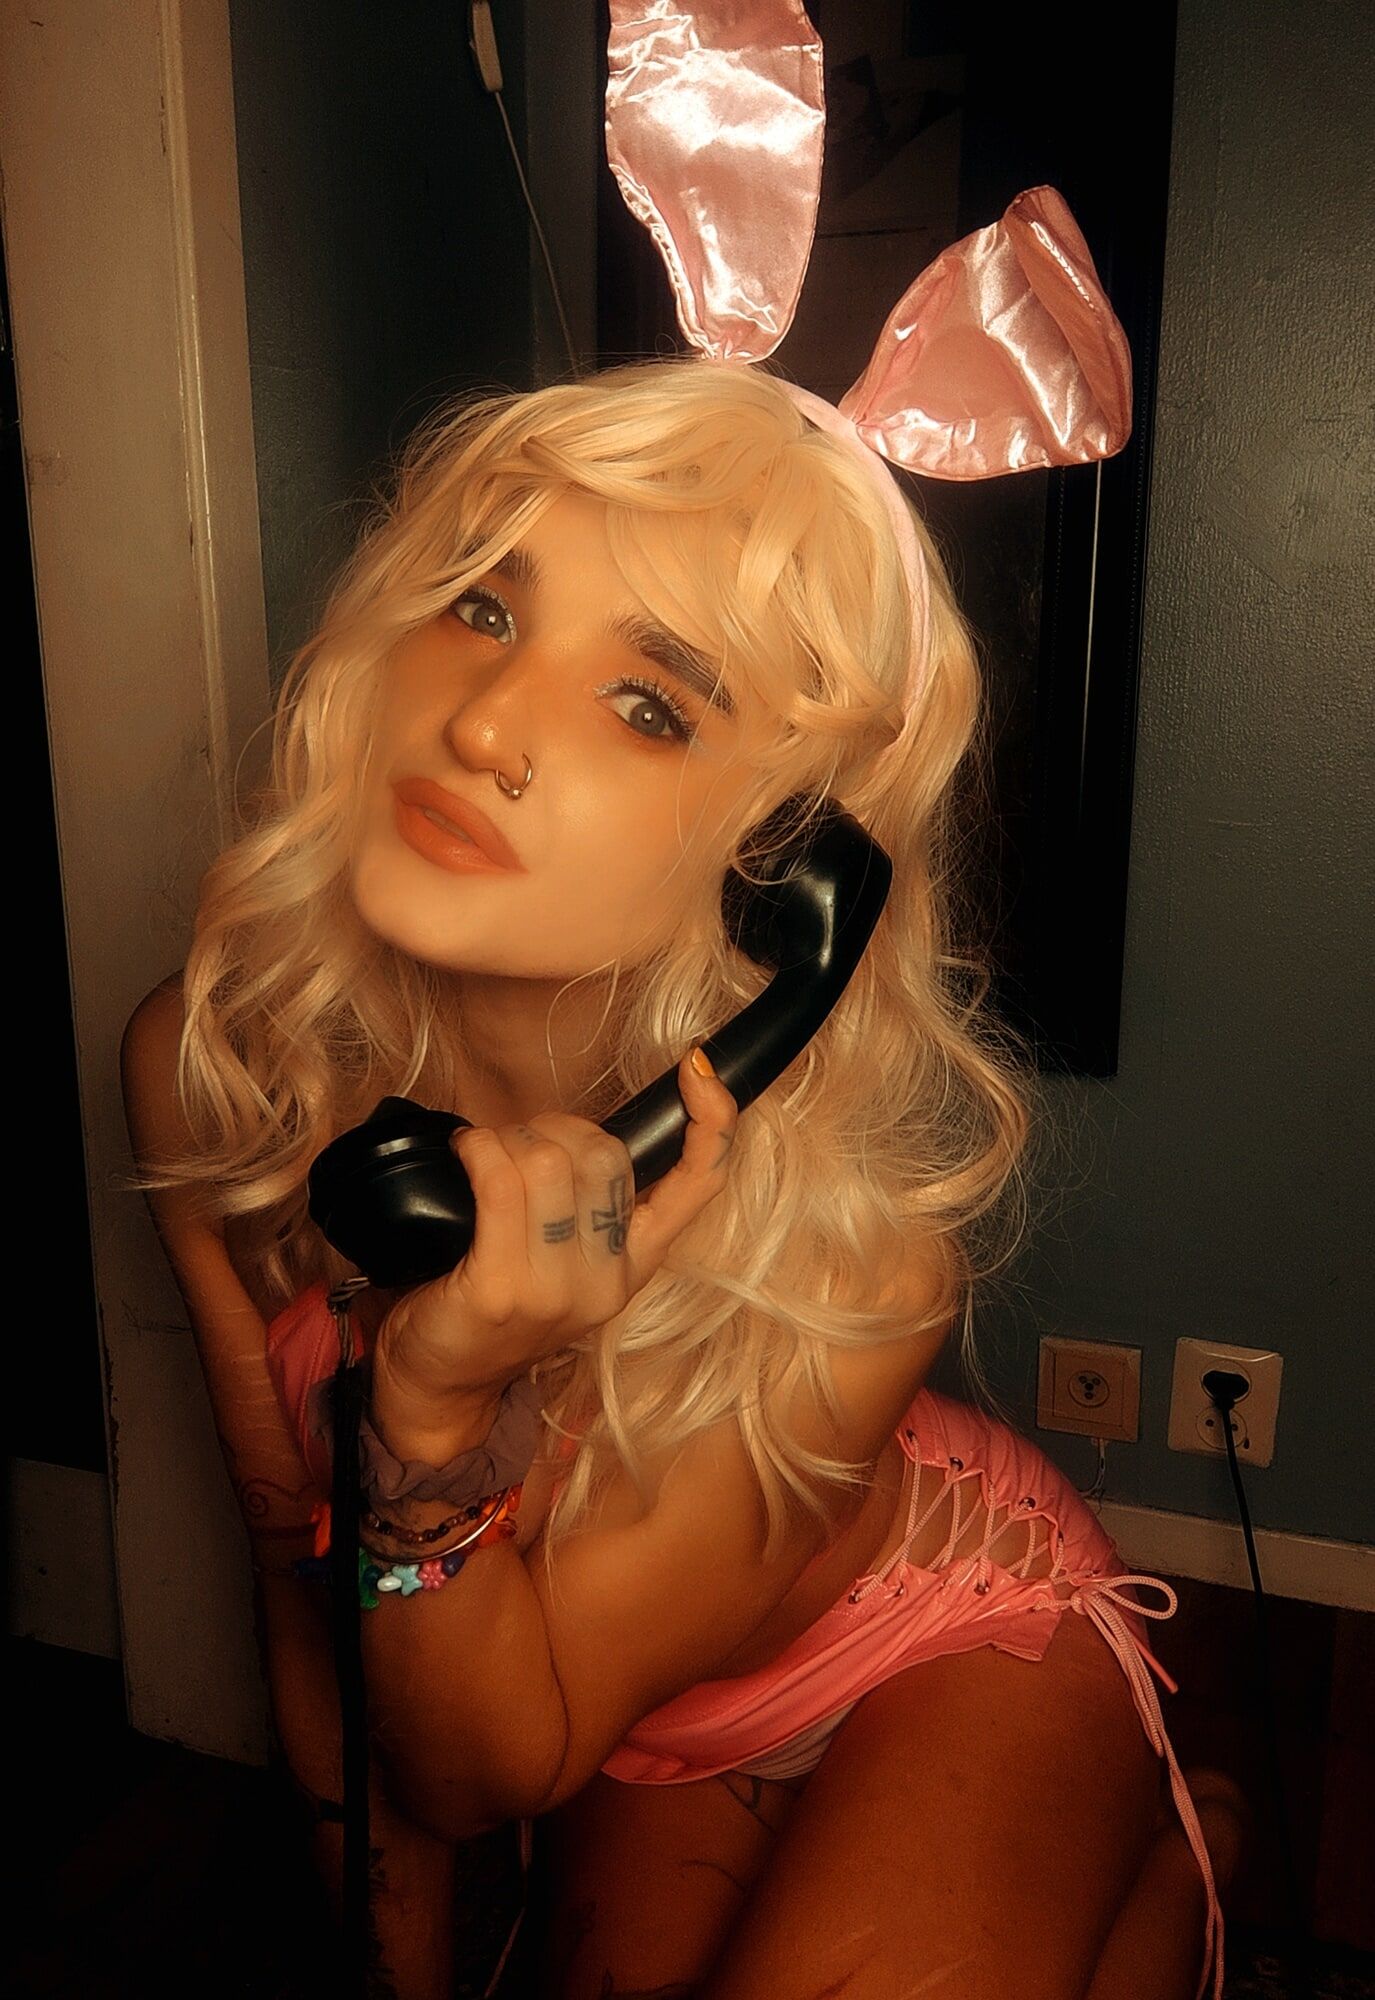 Pink bunny talking on the phone while showing off pussy #52